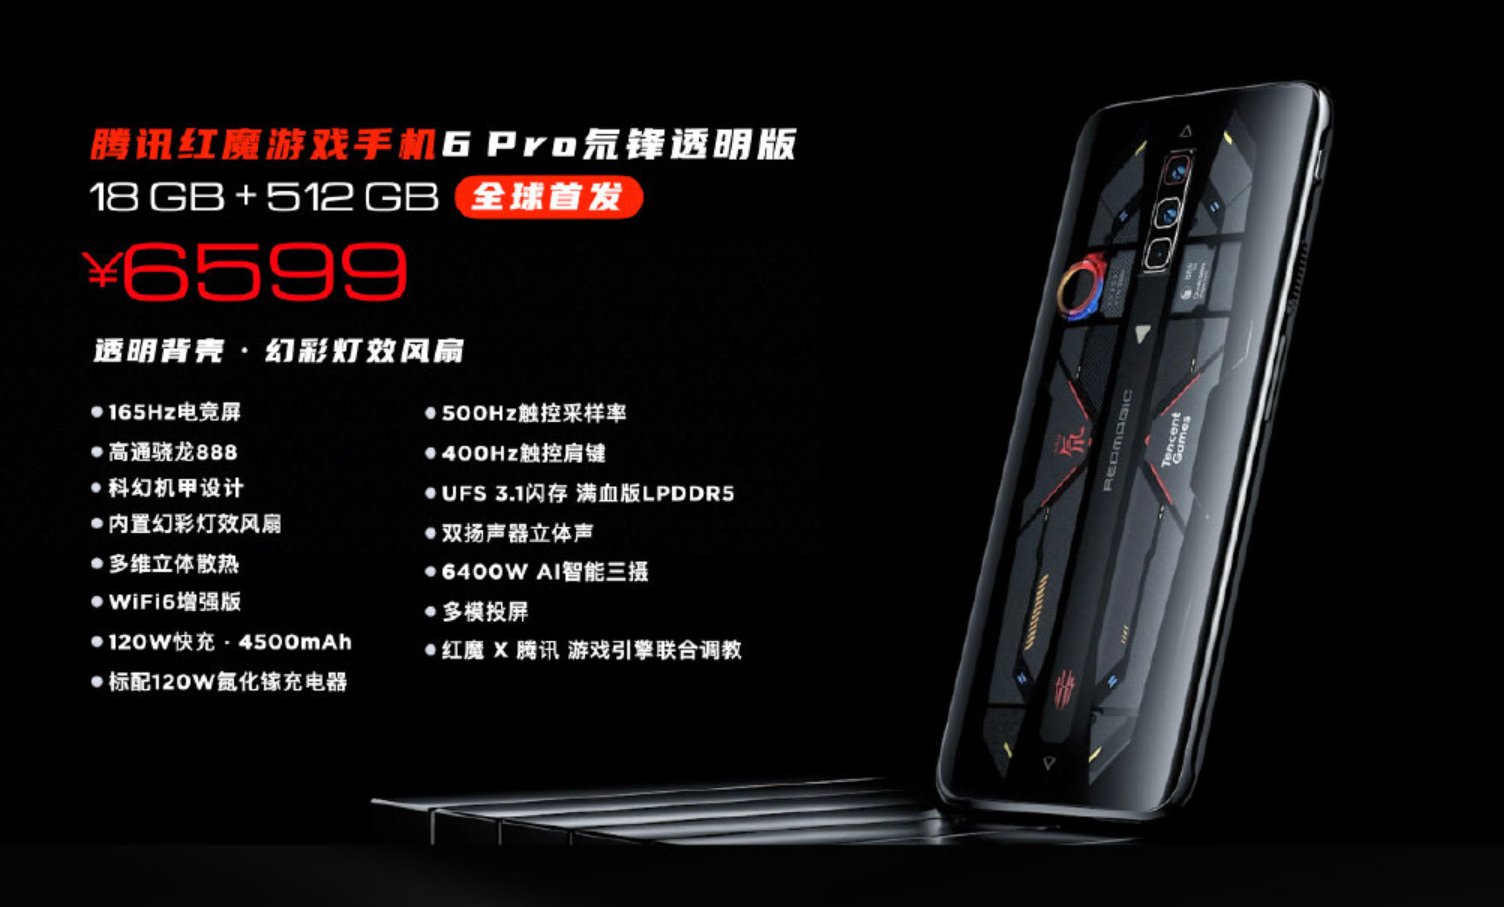 ICE UNIVERSE on Twitter: "The transparent version Red Magic Pro is with 18GB of RAM.the 18GB RAM phone was born! https://t.co/gekswFhA7a" Twitter